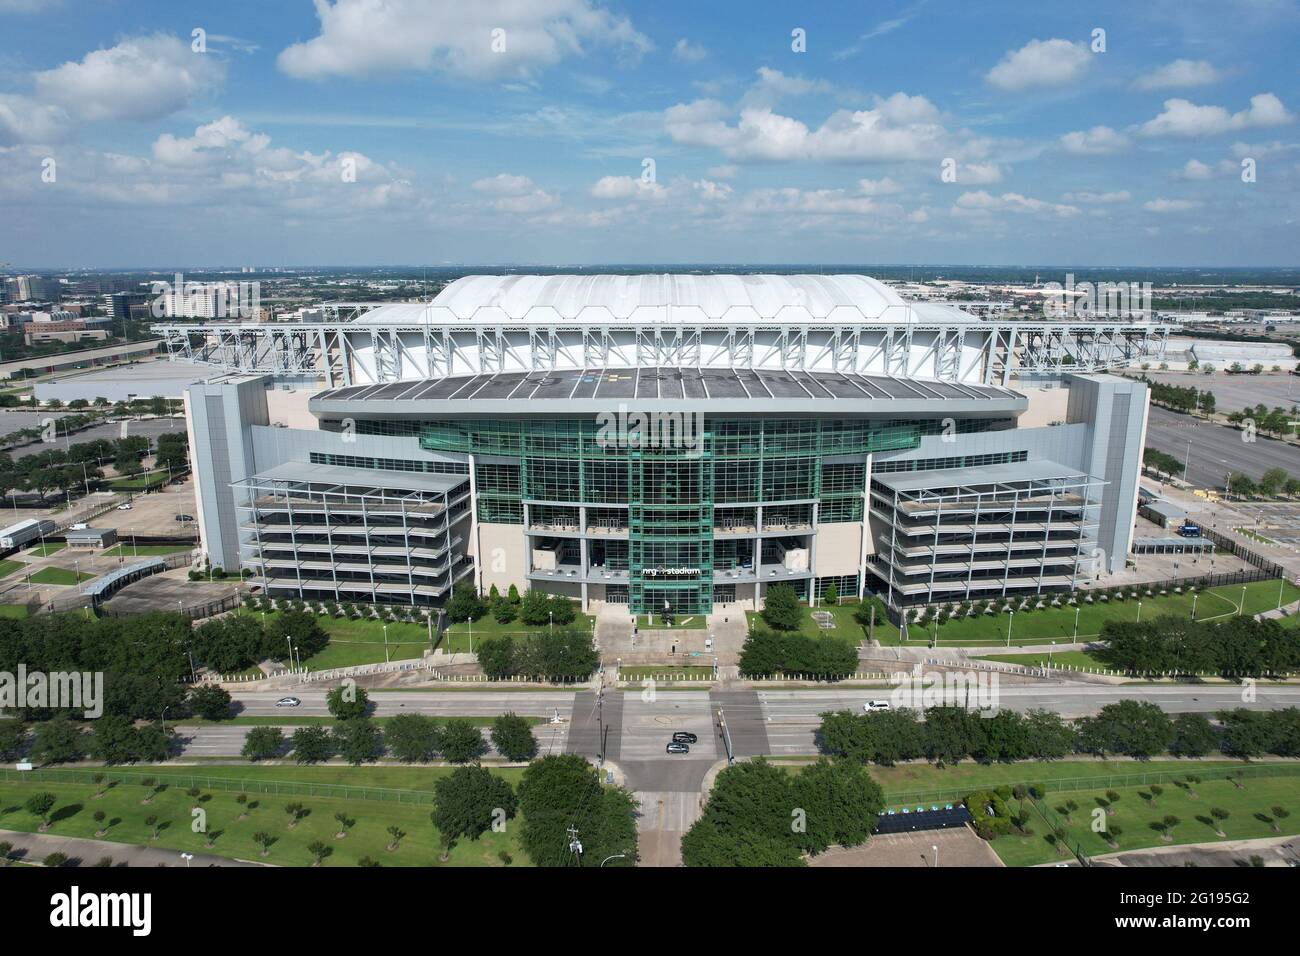 An aerial view of NRG Stadium, Sunday, May 30, 2021, in Houston. The retractable roof stadium is the home of the Houston Texans. Stock Photo